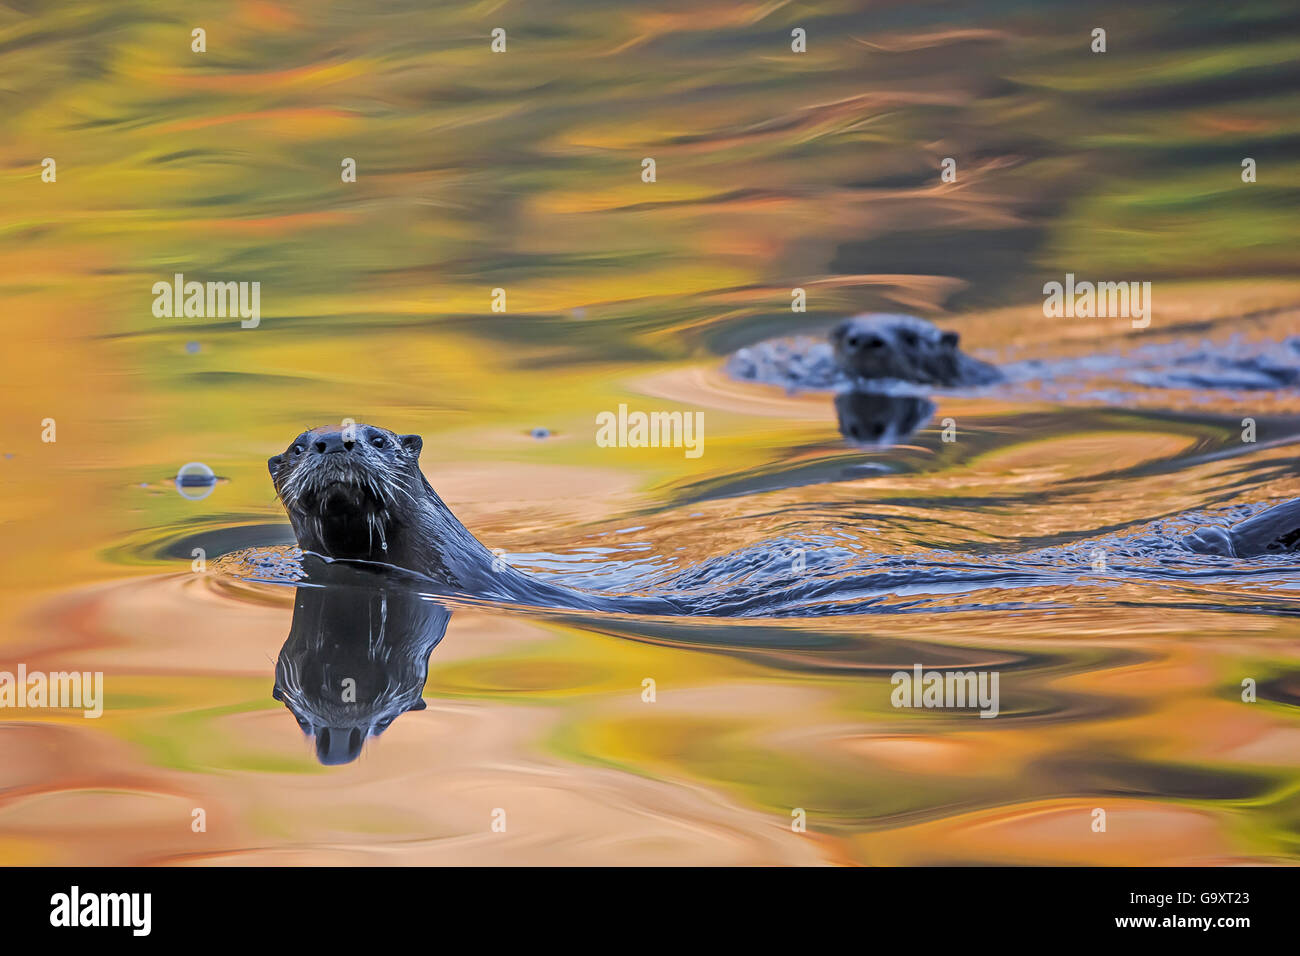 North American river otter (Lontra canadensis) two in water with autumnal trees reflected in the water, Acadia National Park, Maine, USA, October. Stock Photo